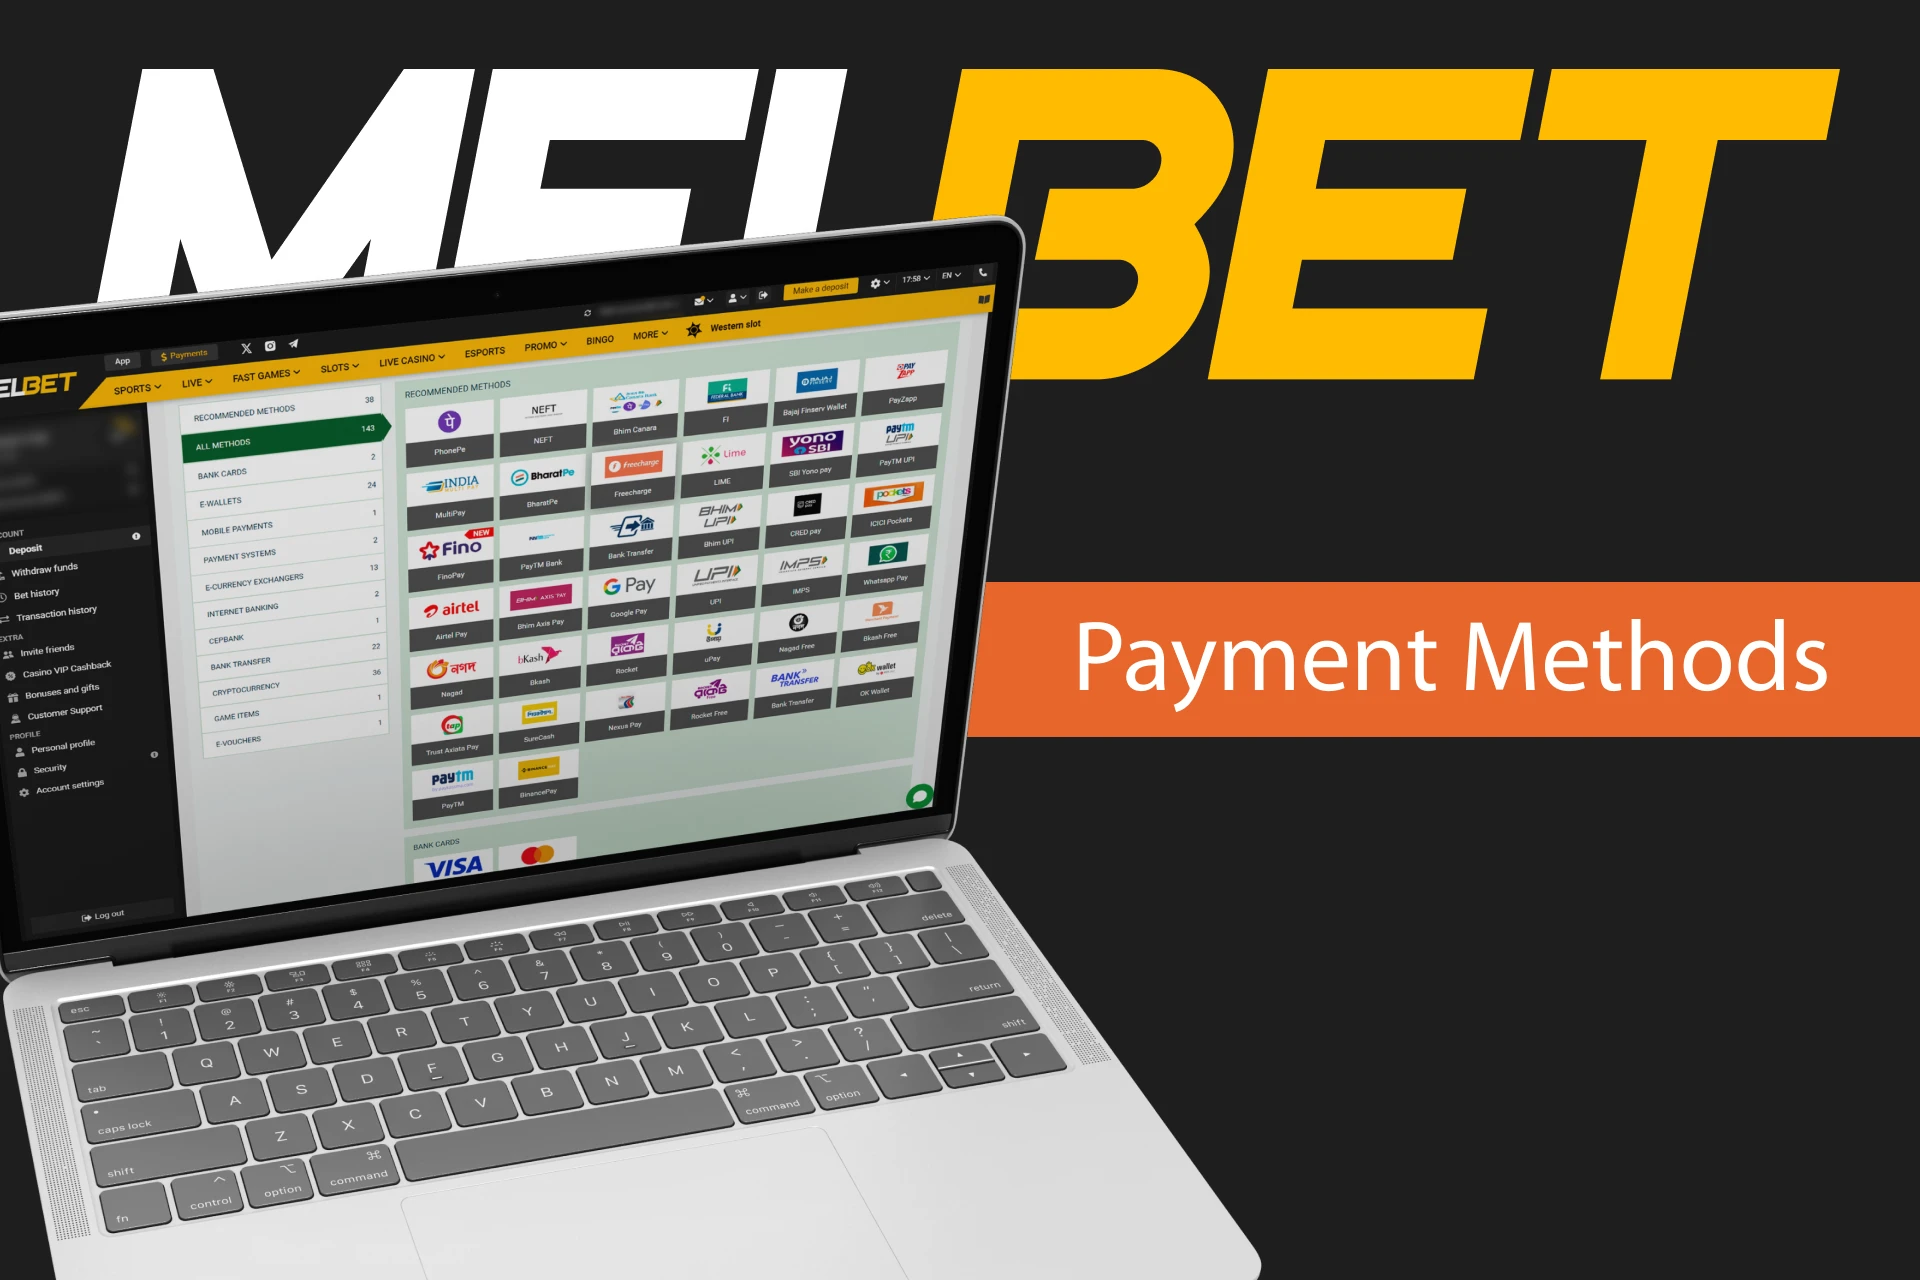 Melbet has many payment methods to suit every taste.